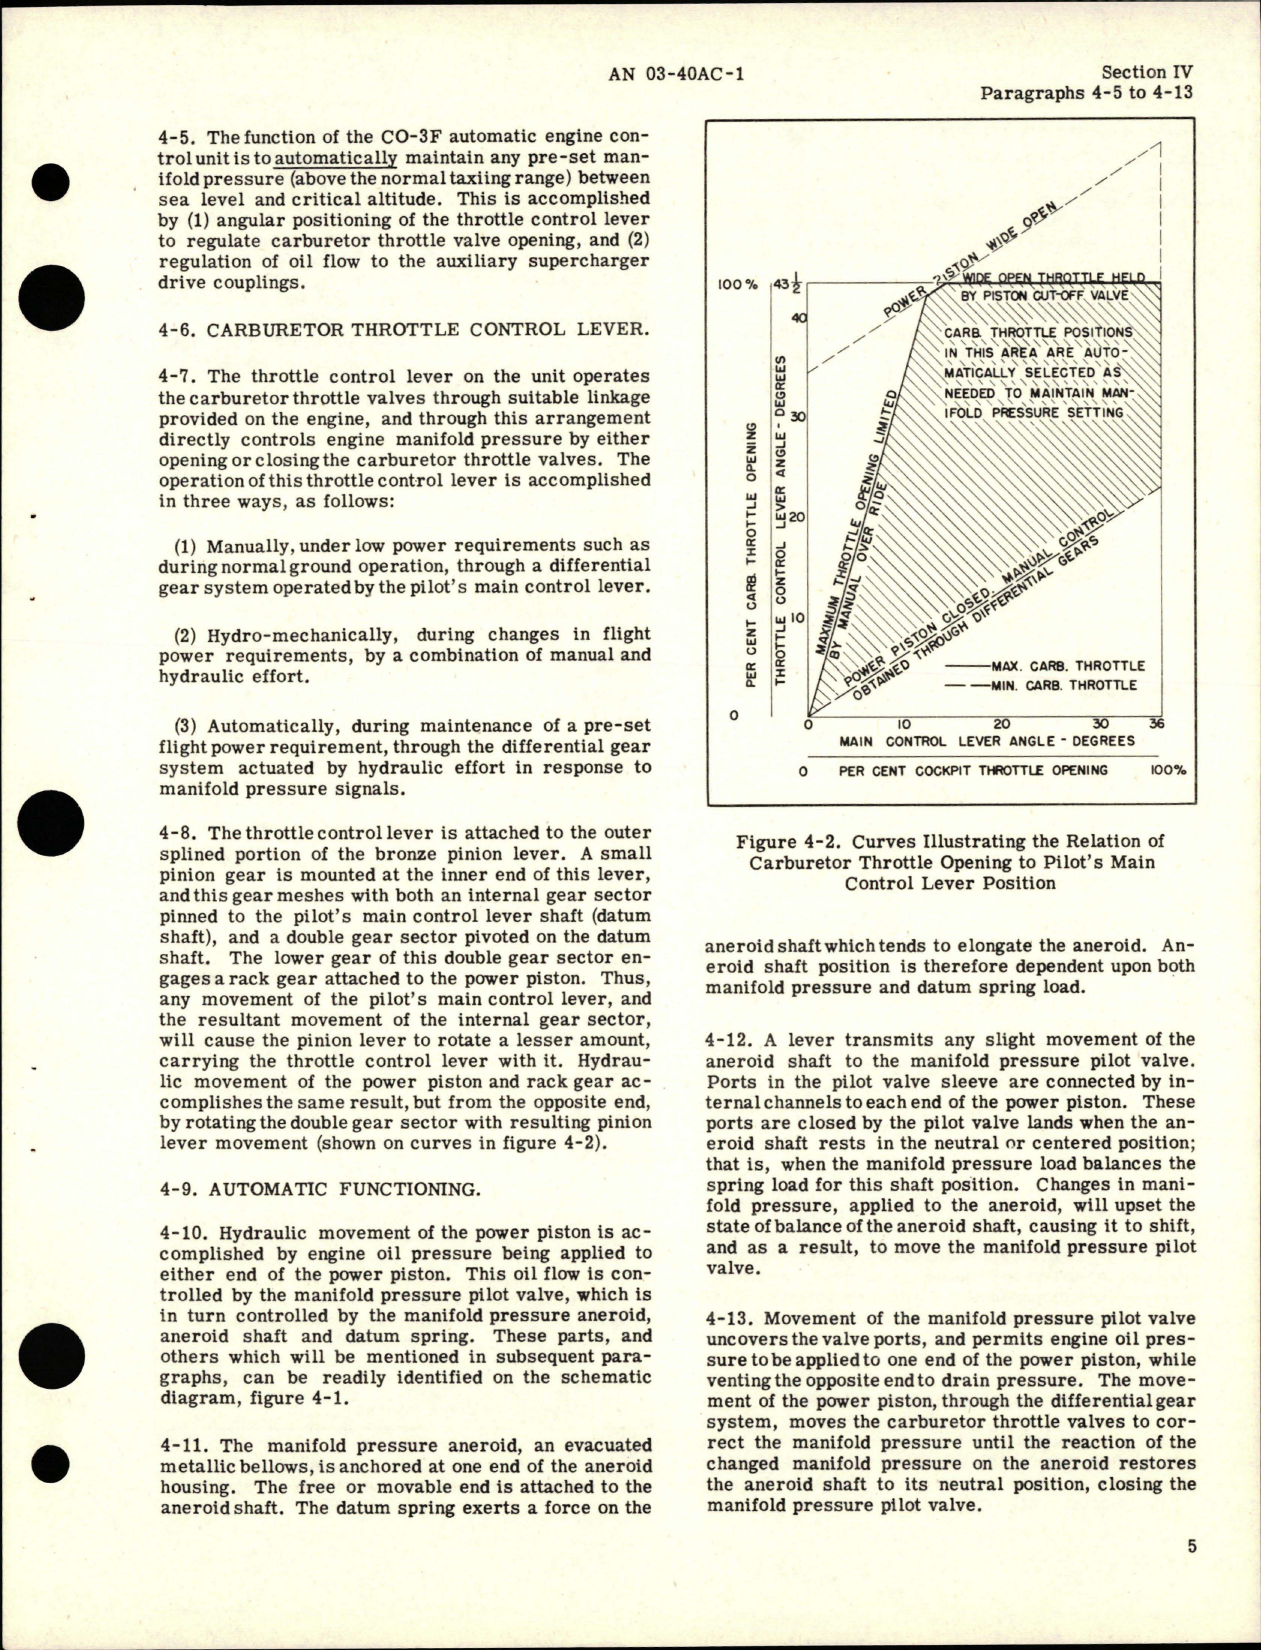 Sample page 9 from AirCorps Library document: Operation, Service and Overhaul Instructions with Parts Catalog for Automatic Engine Control - Model CO-3F 